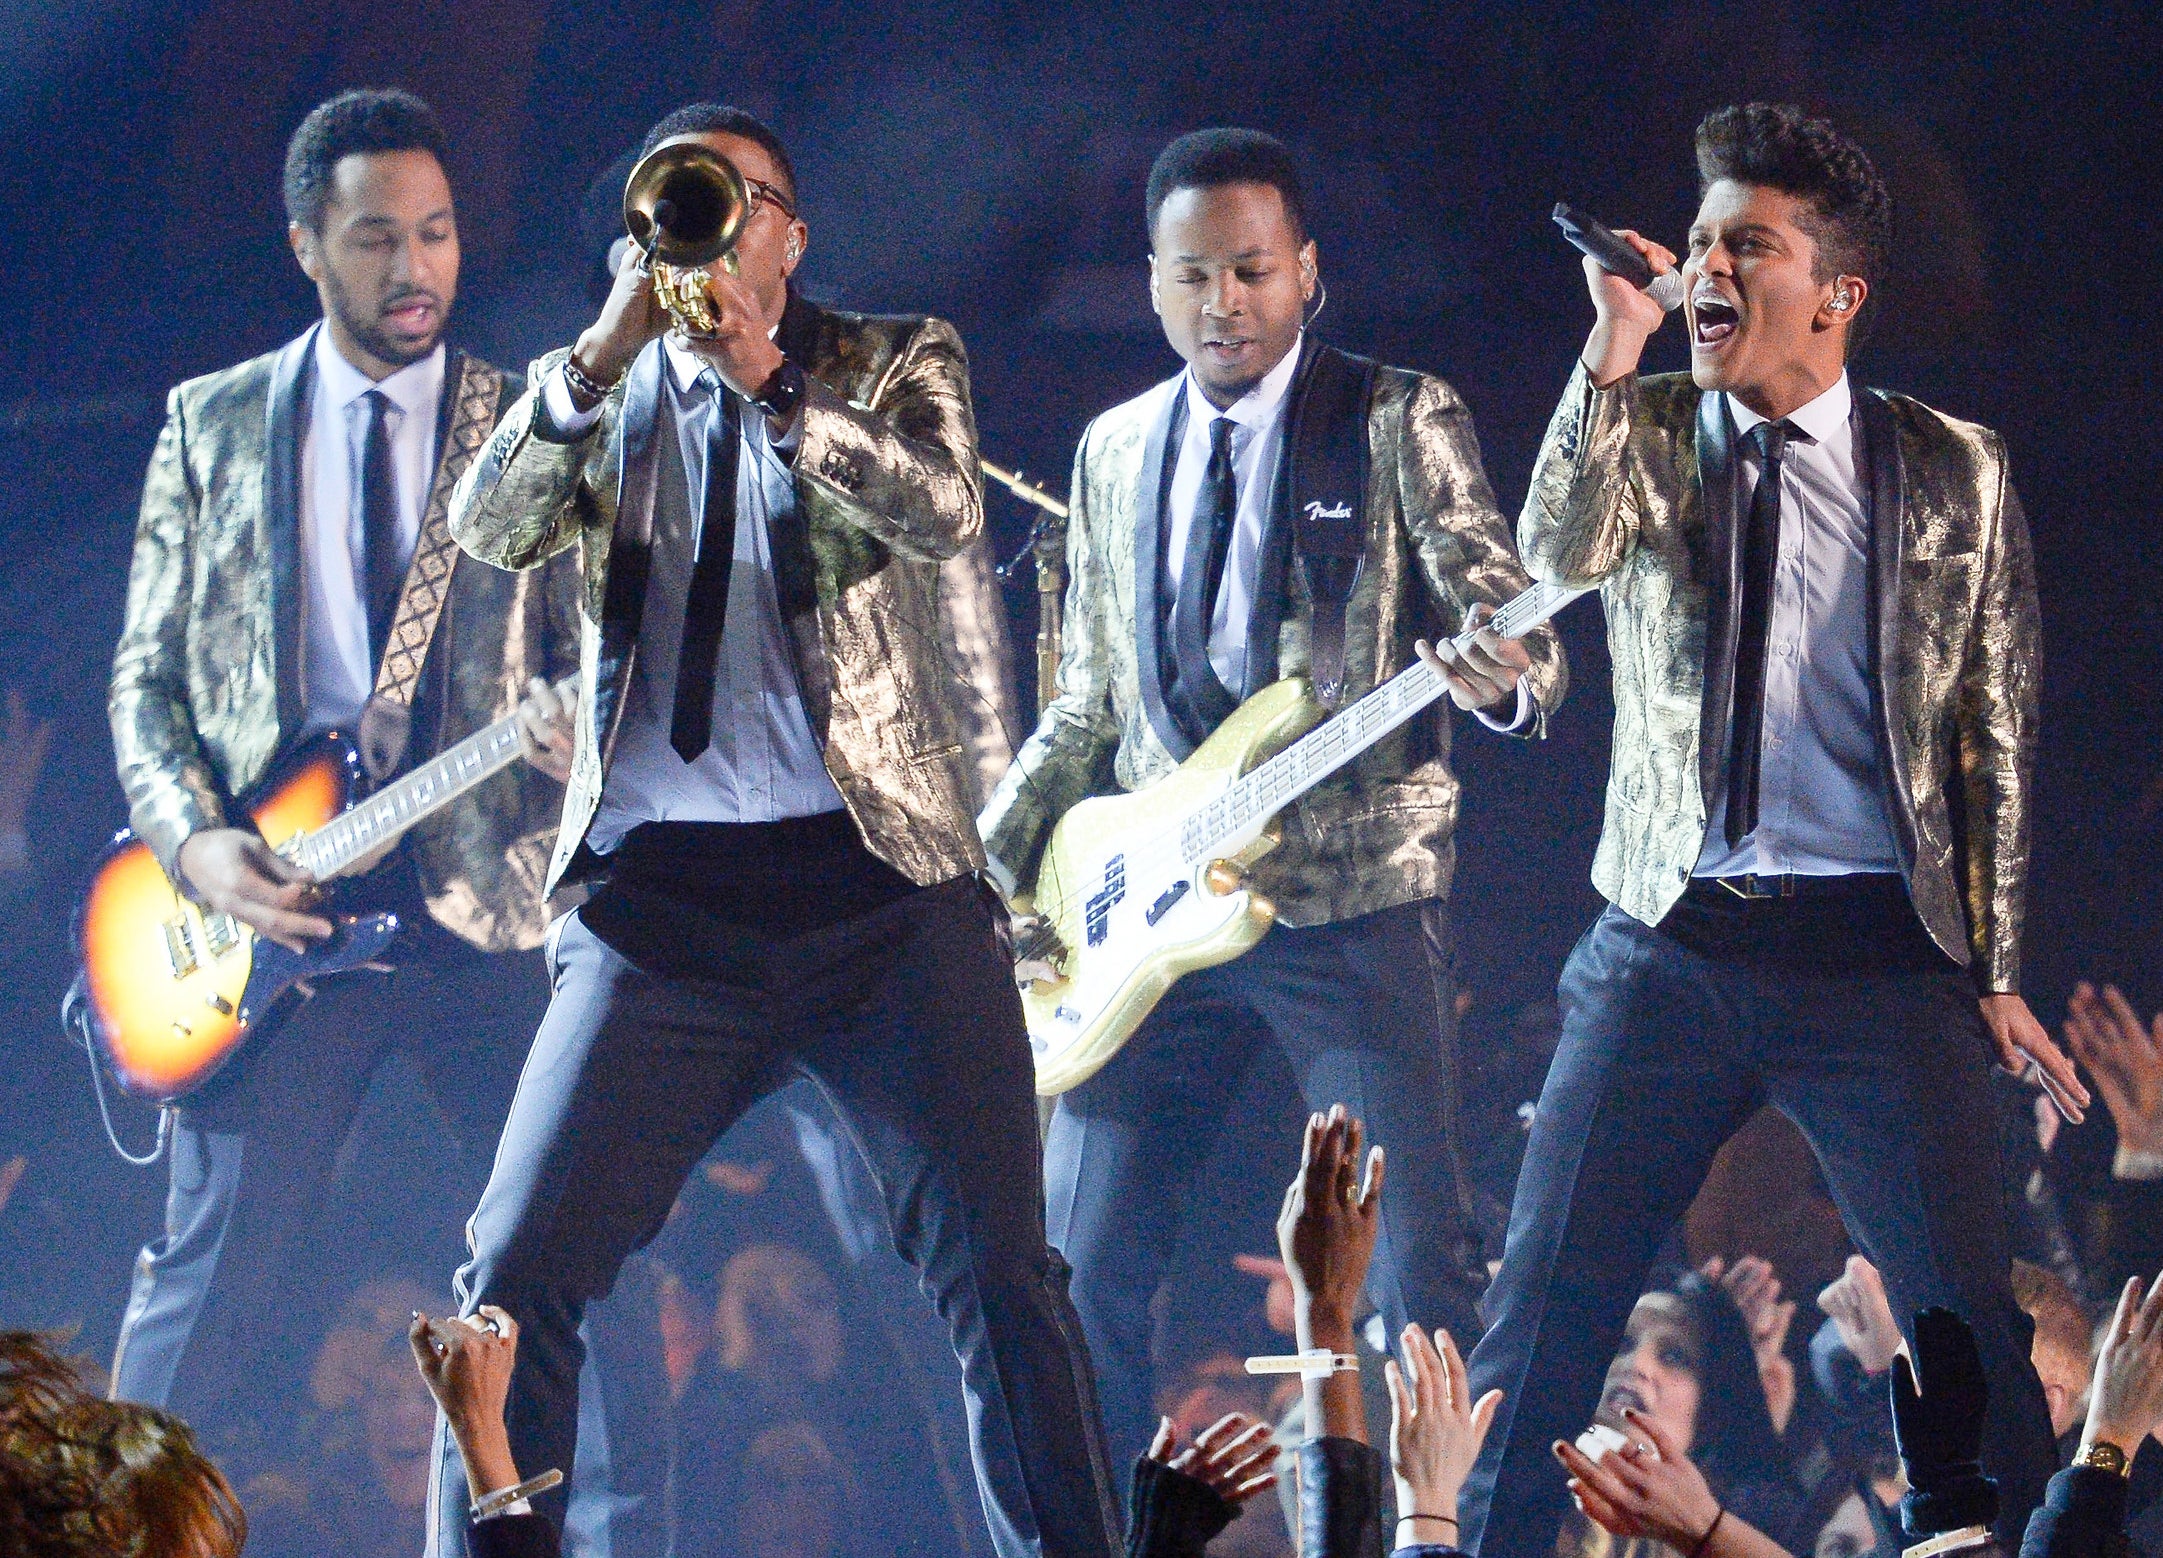 Bruno Mars performs in the Superbowl Halftime Show during Super Bowl XLVIII